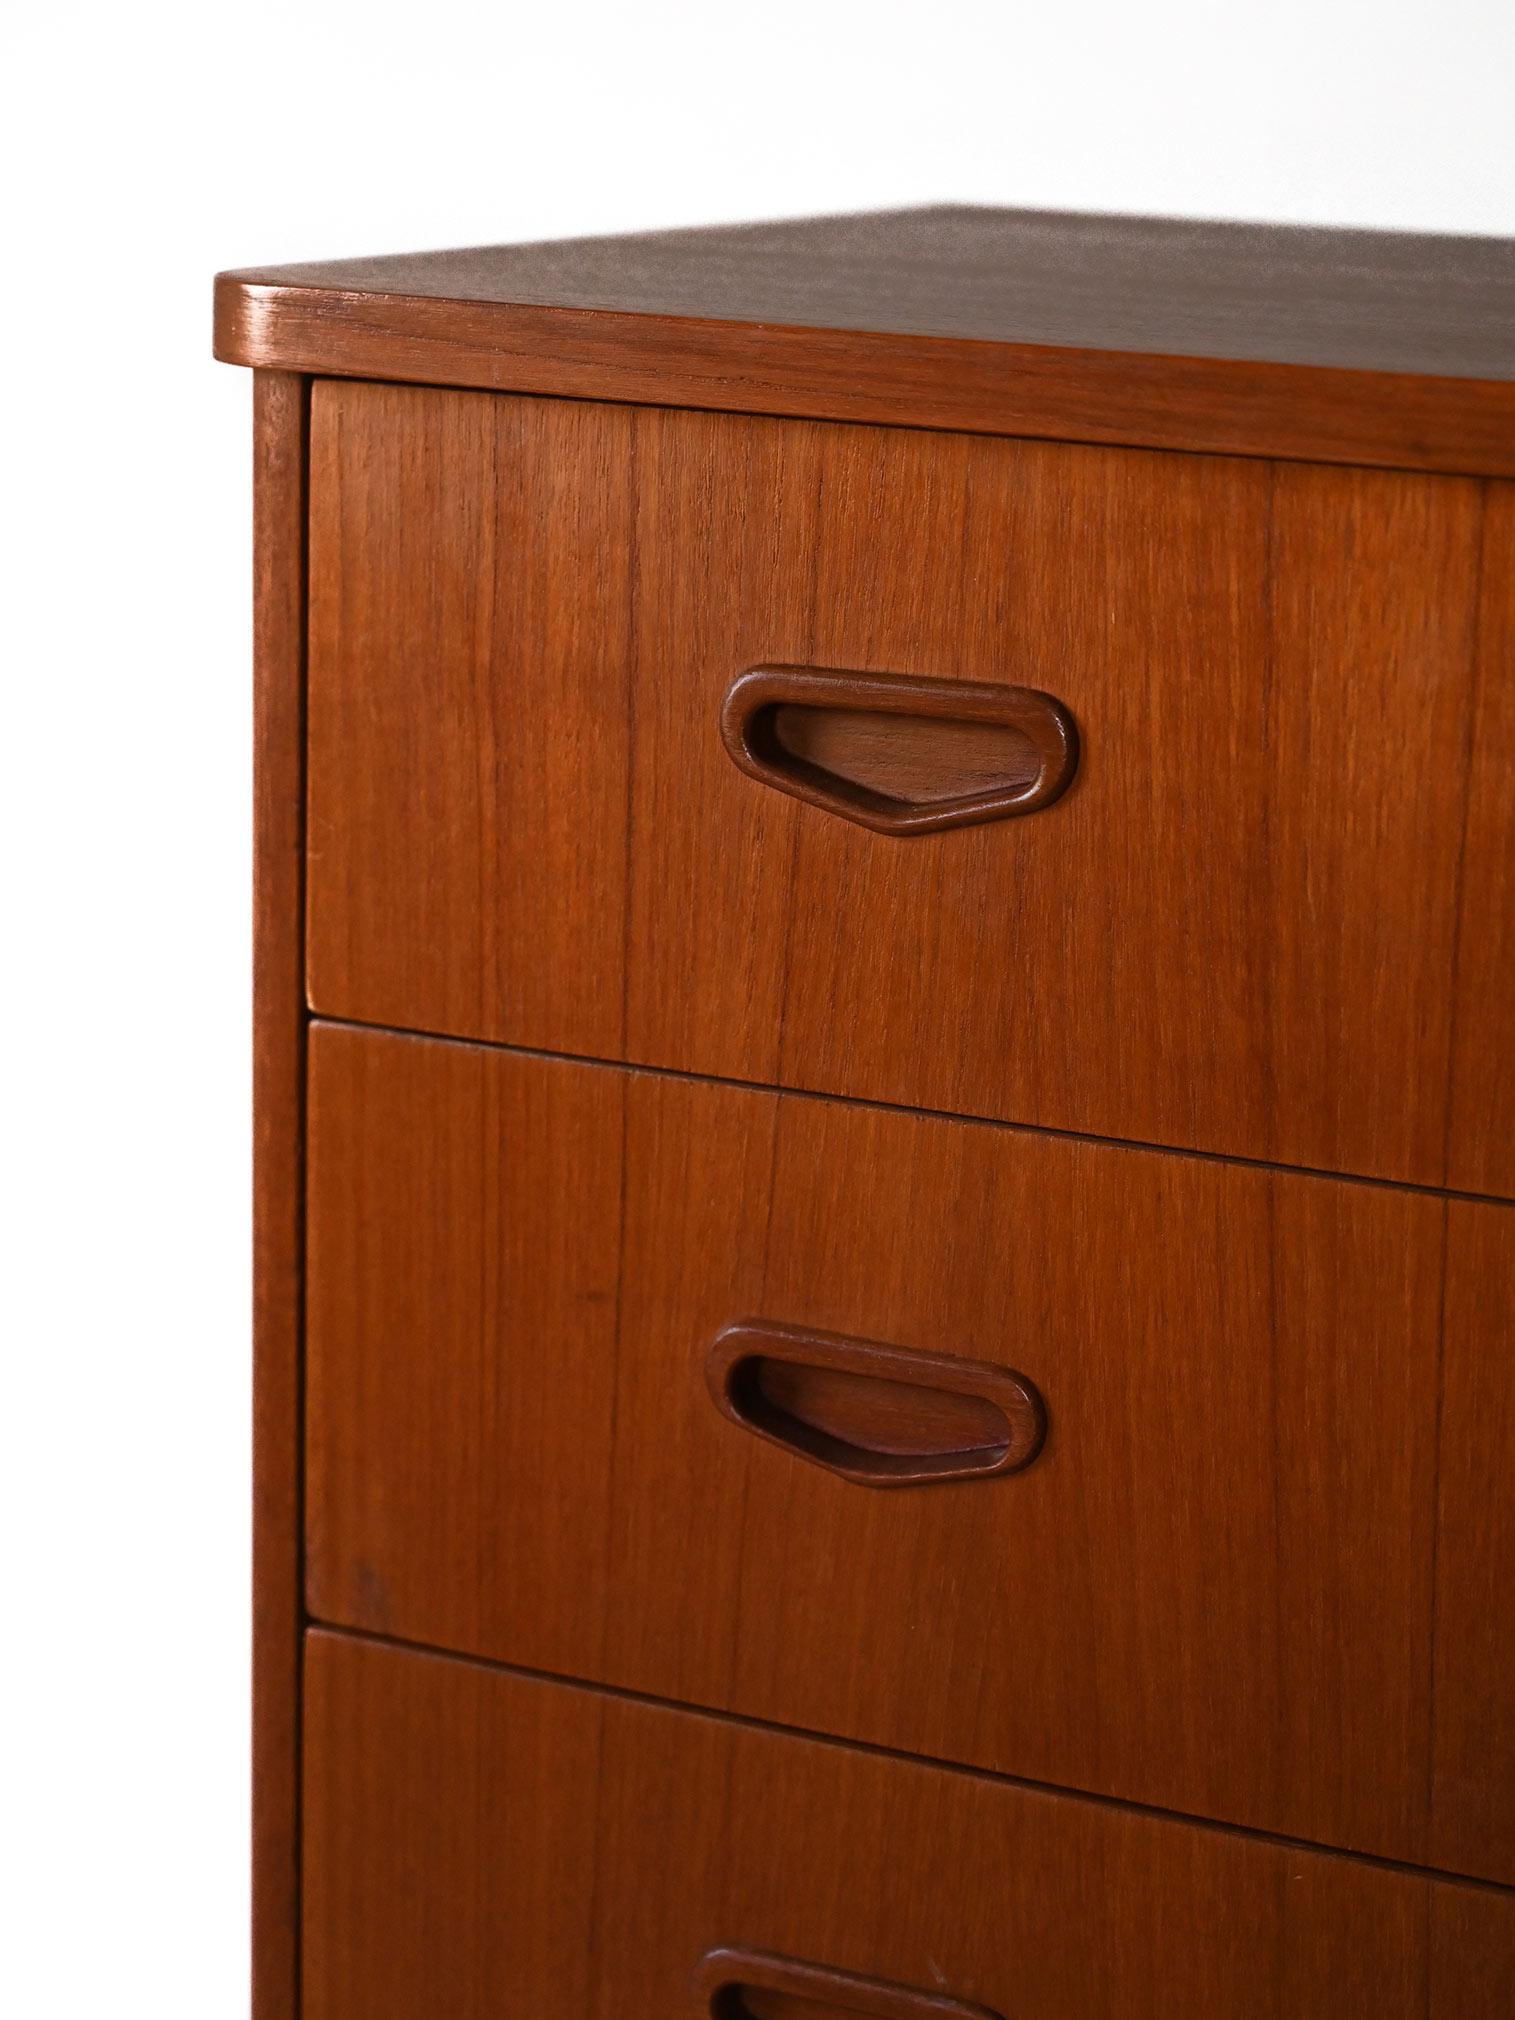 Mid-20th Century Vintage teak chest of drawers with 3 drawers